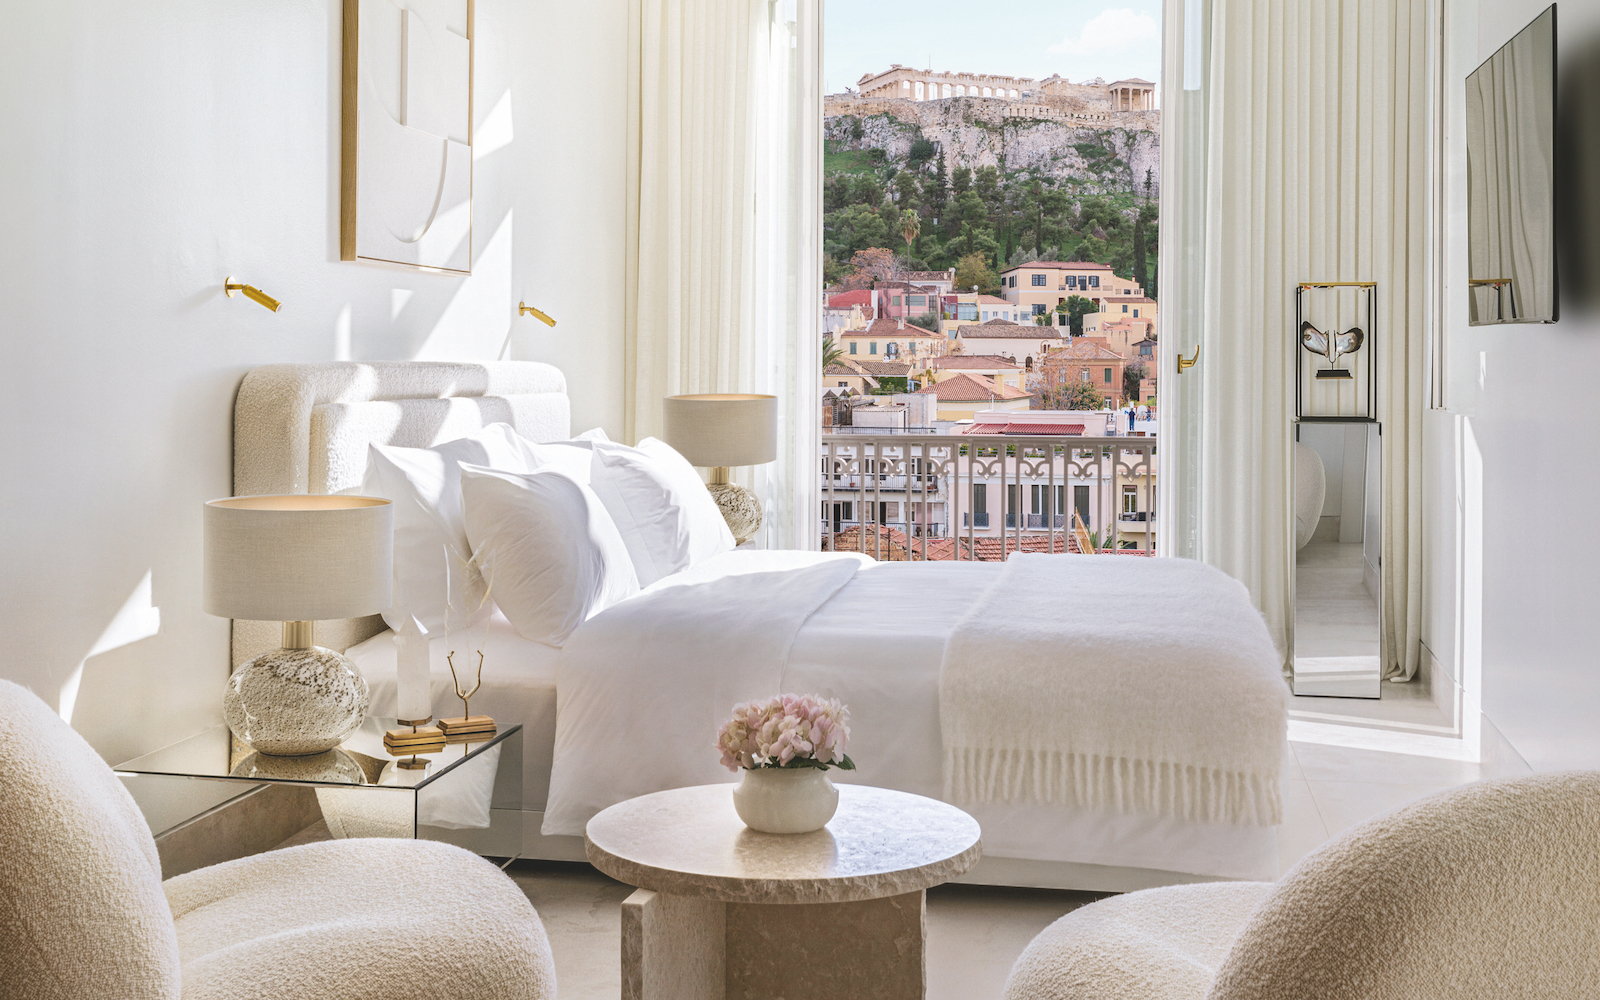 A white suite in luxury hotel in Athens that has a view of the acropolis